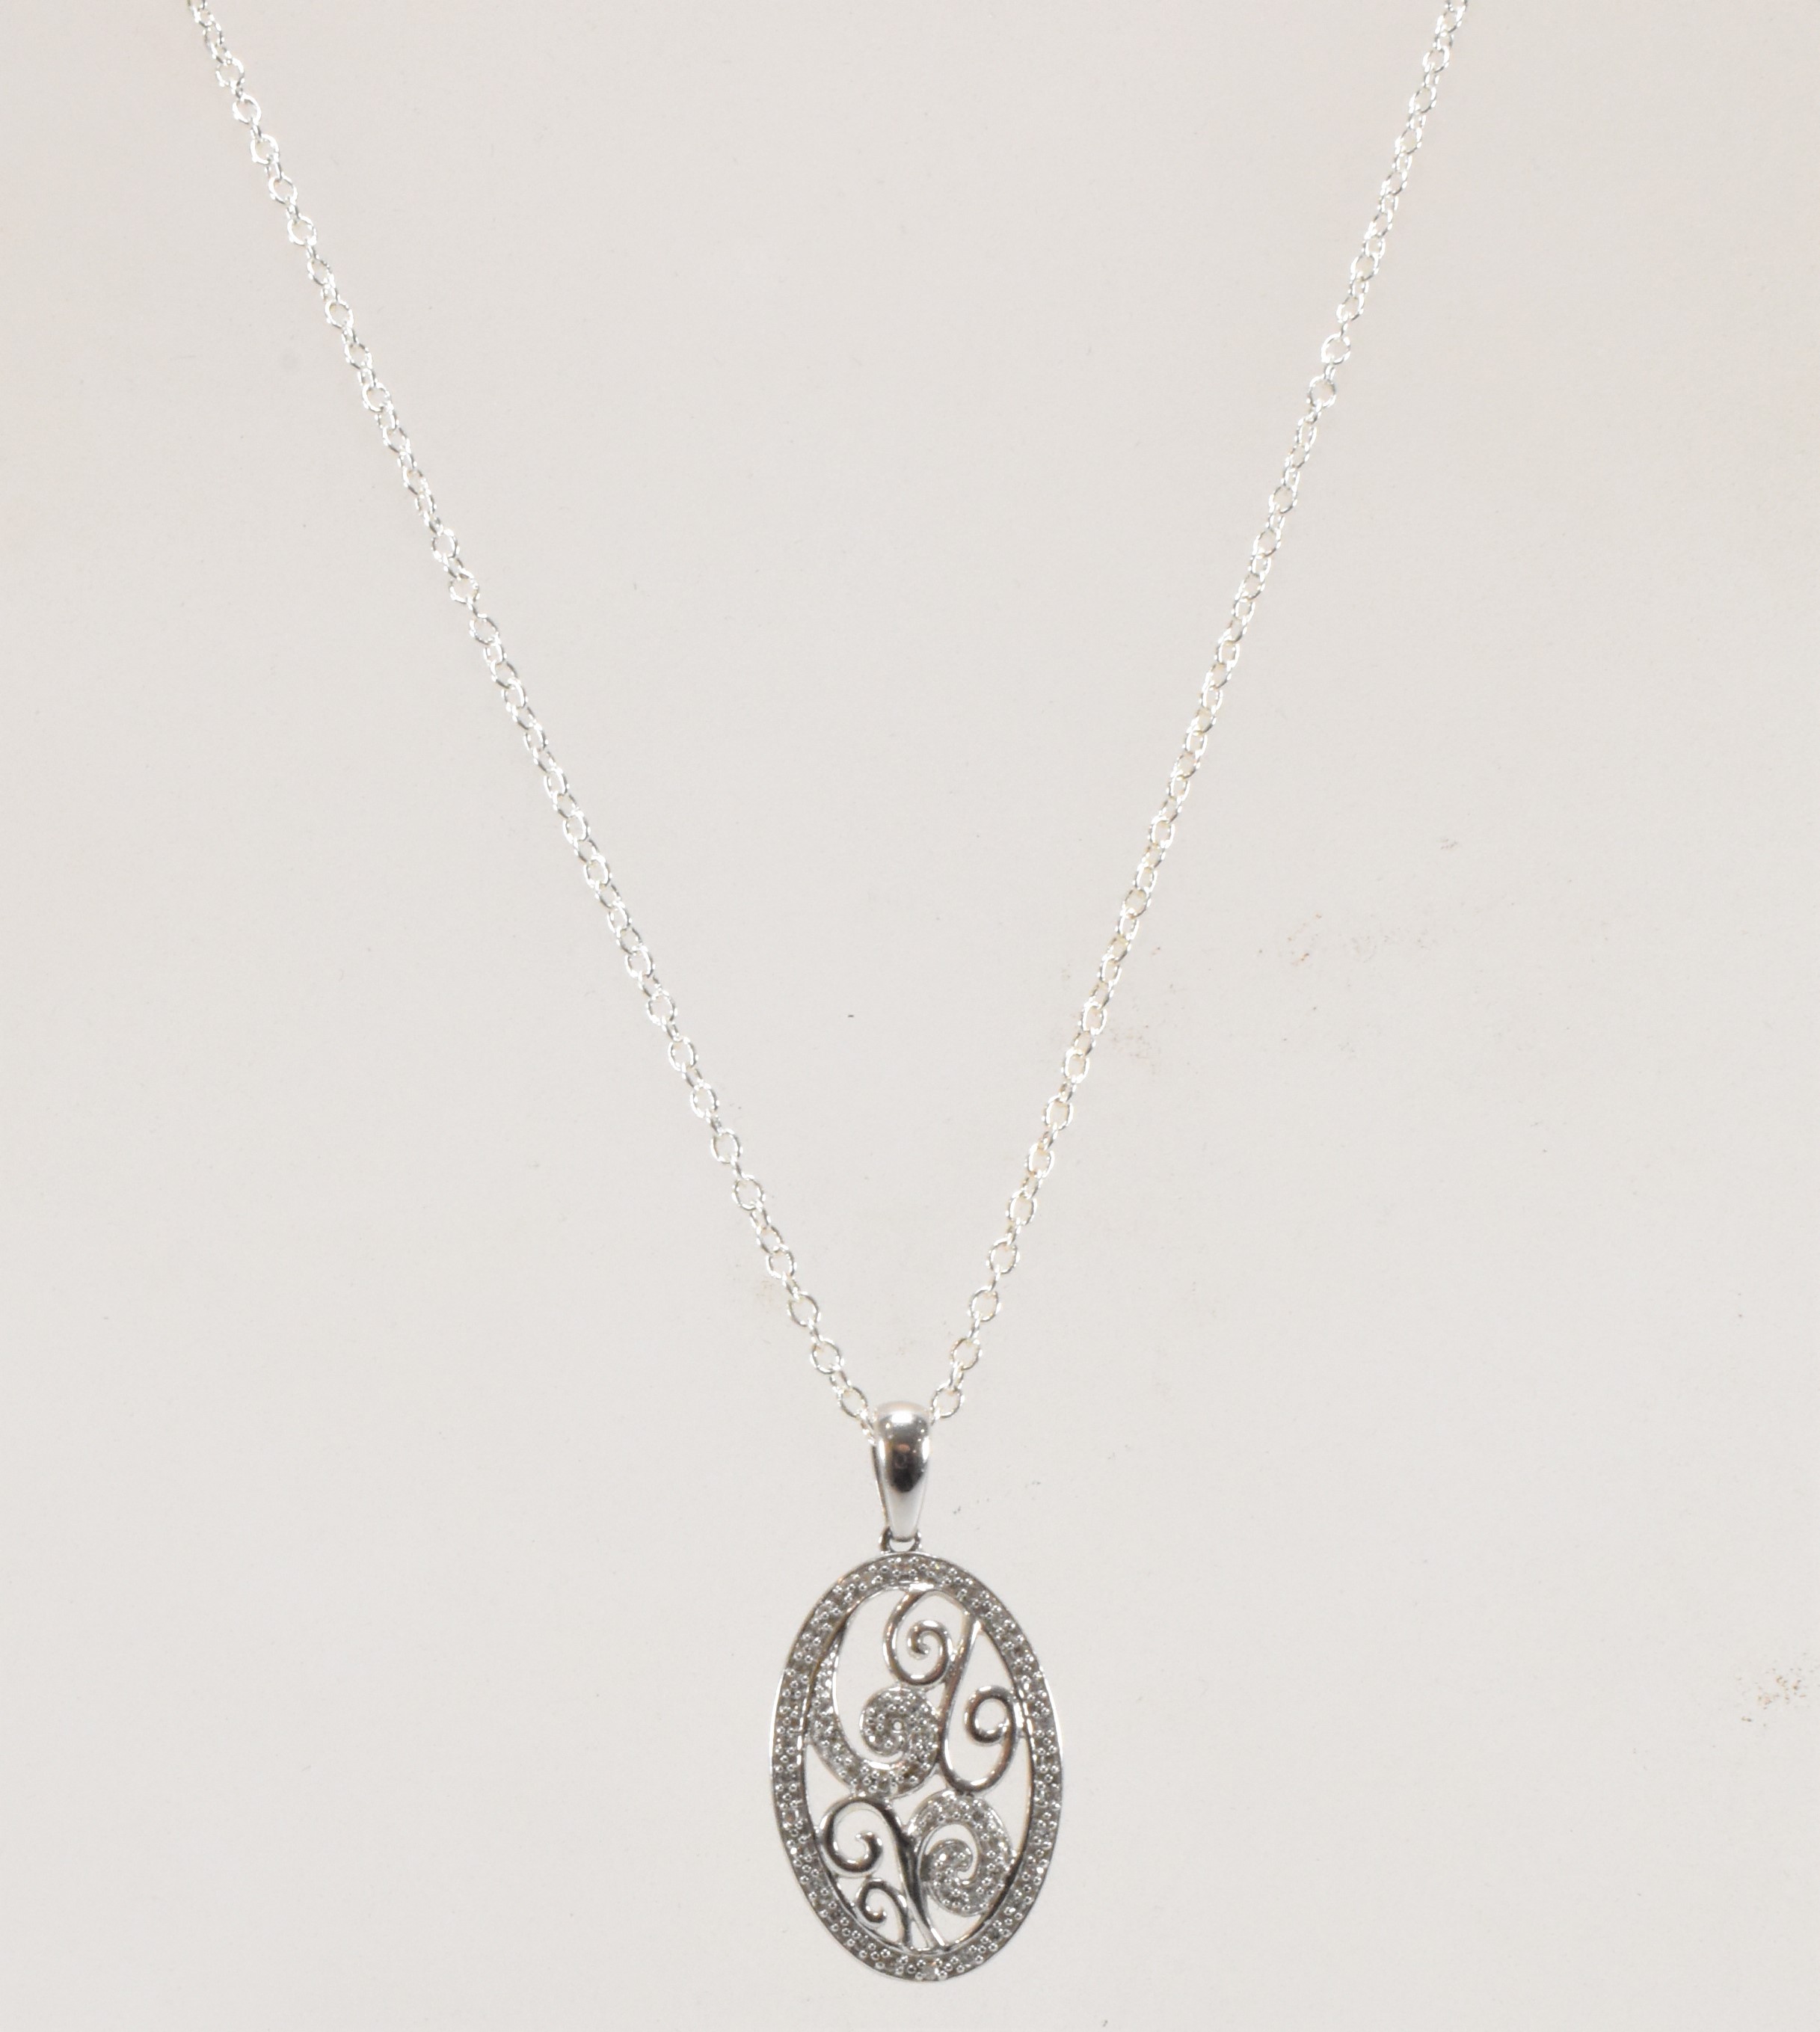 WHITE GOLD & DIAMOND PENDANT WITH SILVER CHAIN NECKLACE - Image 2 of 4